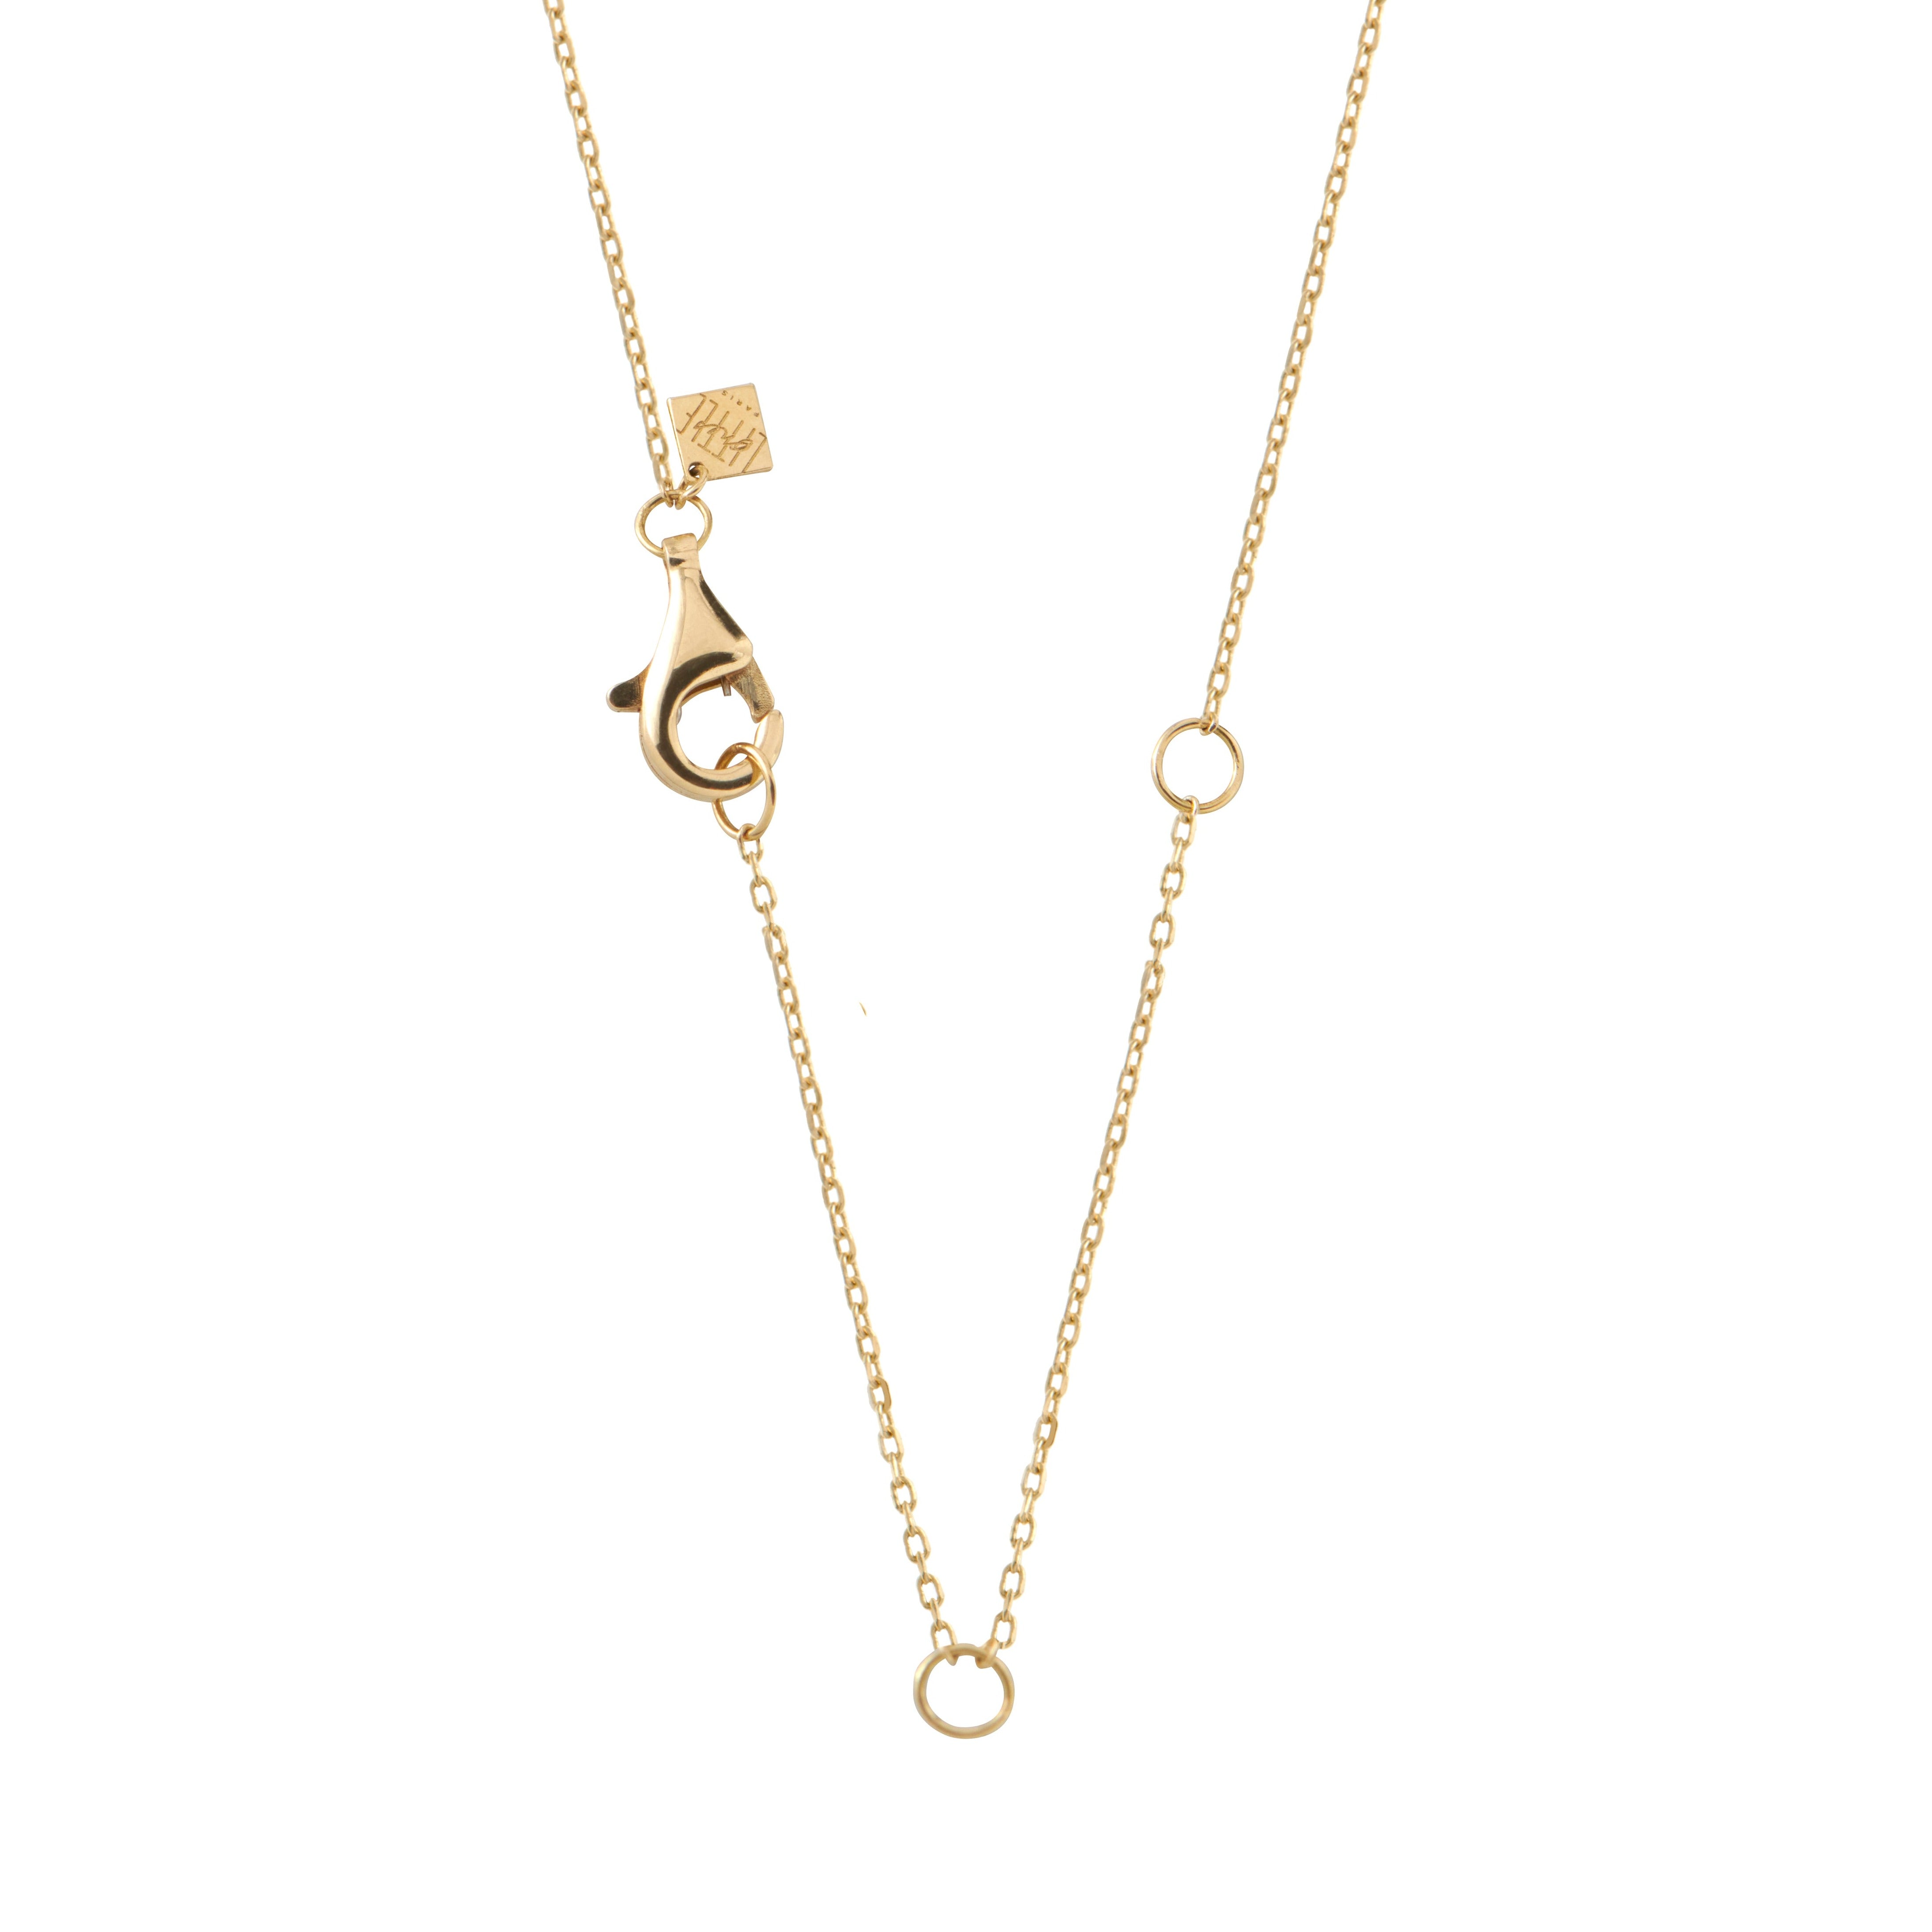 Diamonds and 18Kt yellow / rose / white gold boy pendant necklace